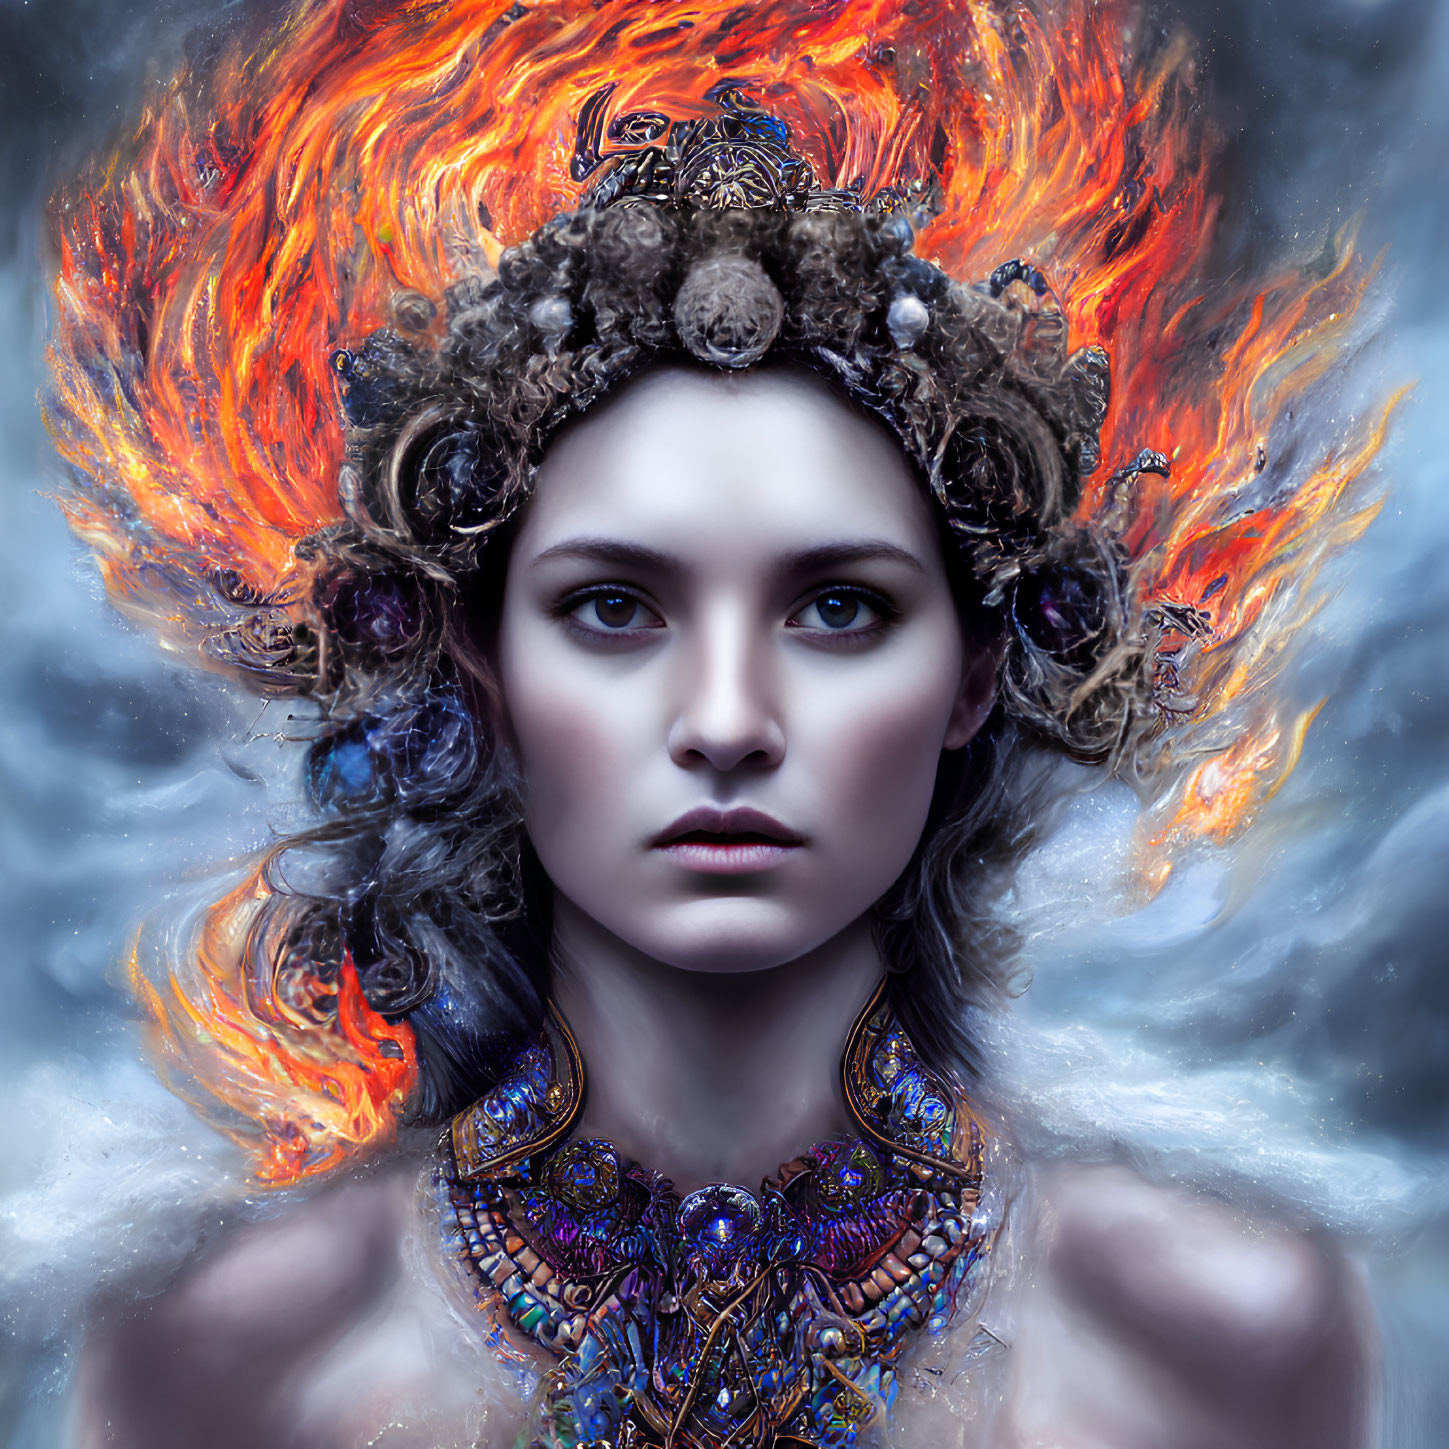 Portrait of woman with fiery orange hair and ornate headpiece.